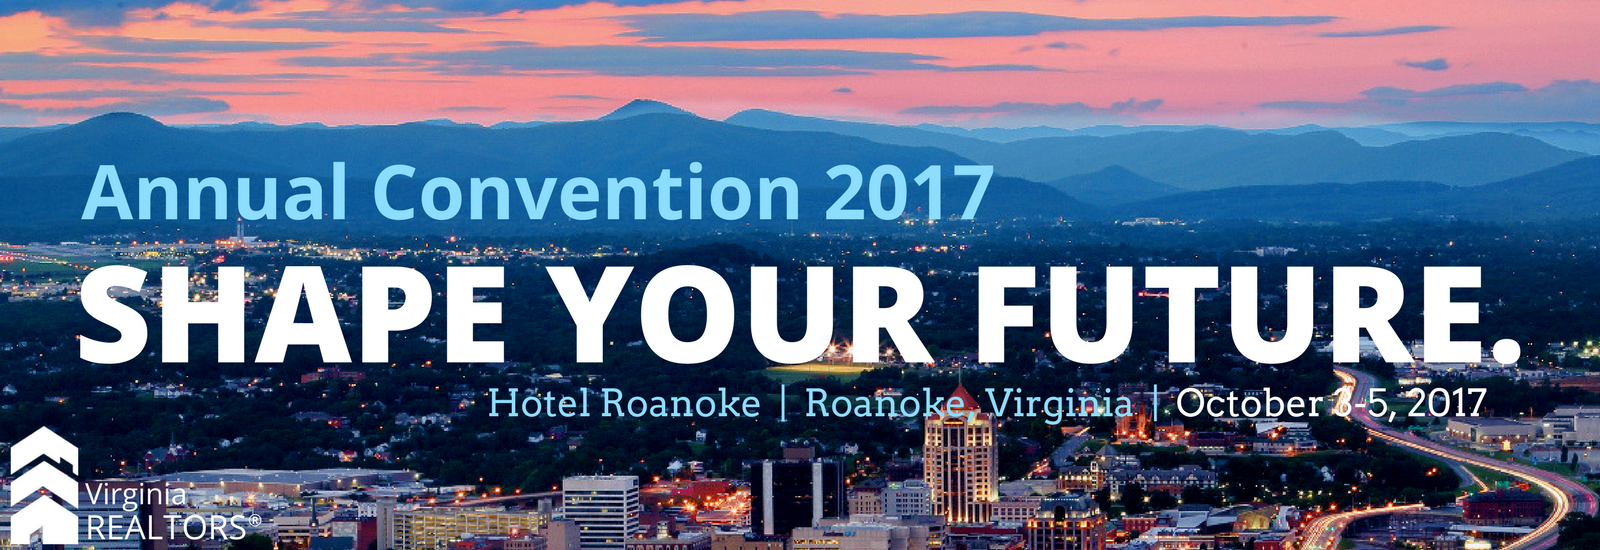 Annual Convention 2017 Roanoke Banner